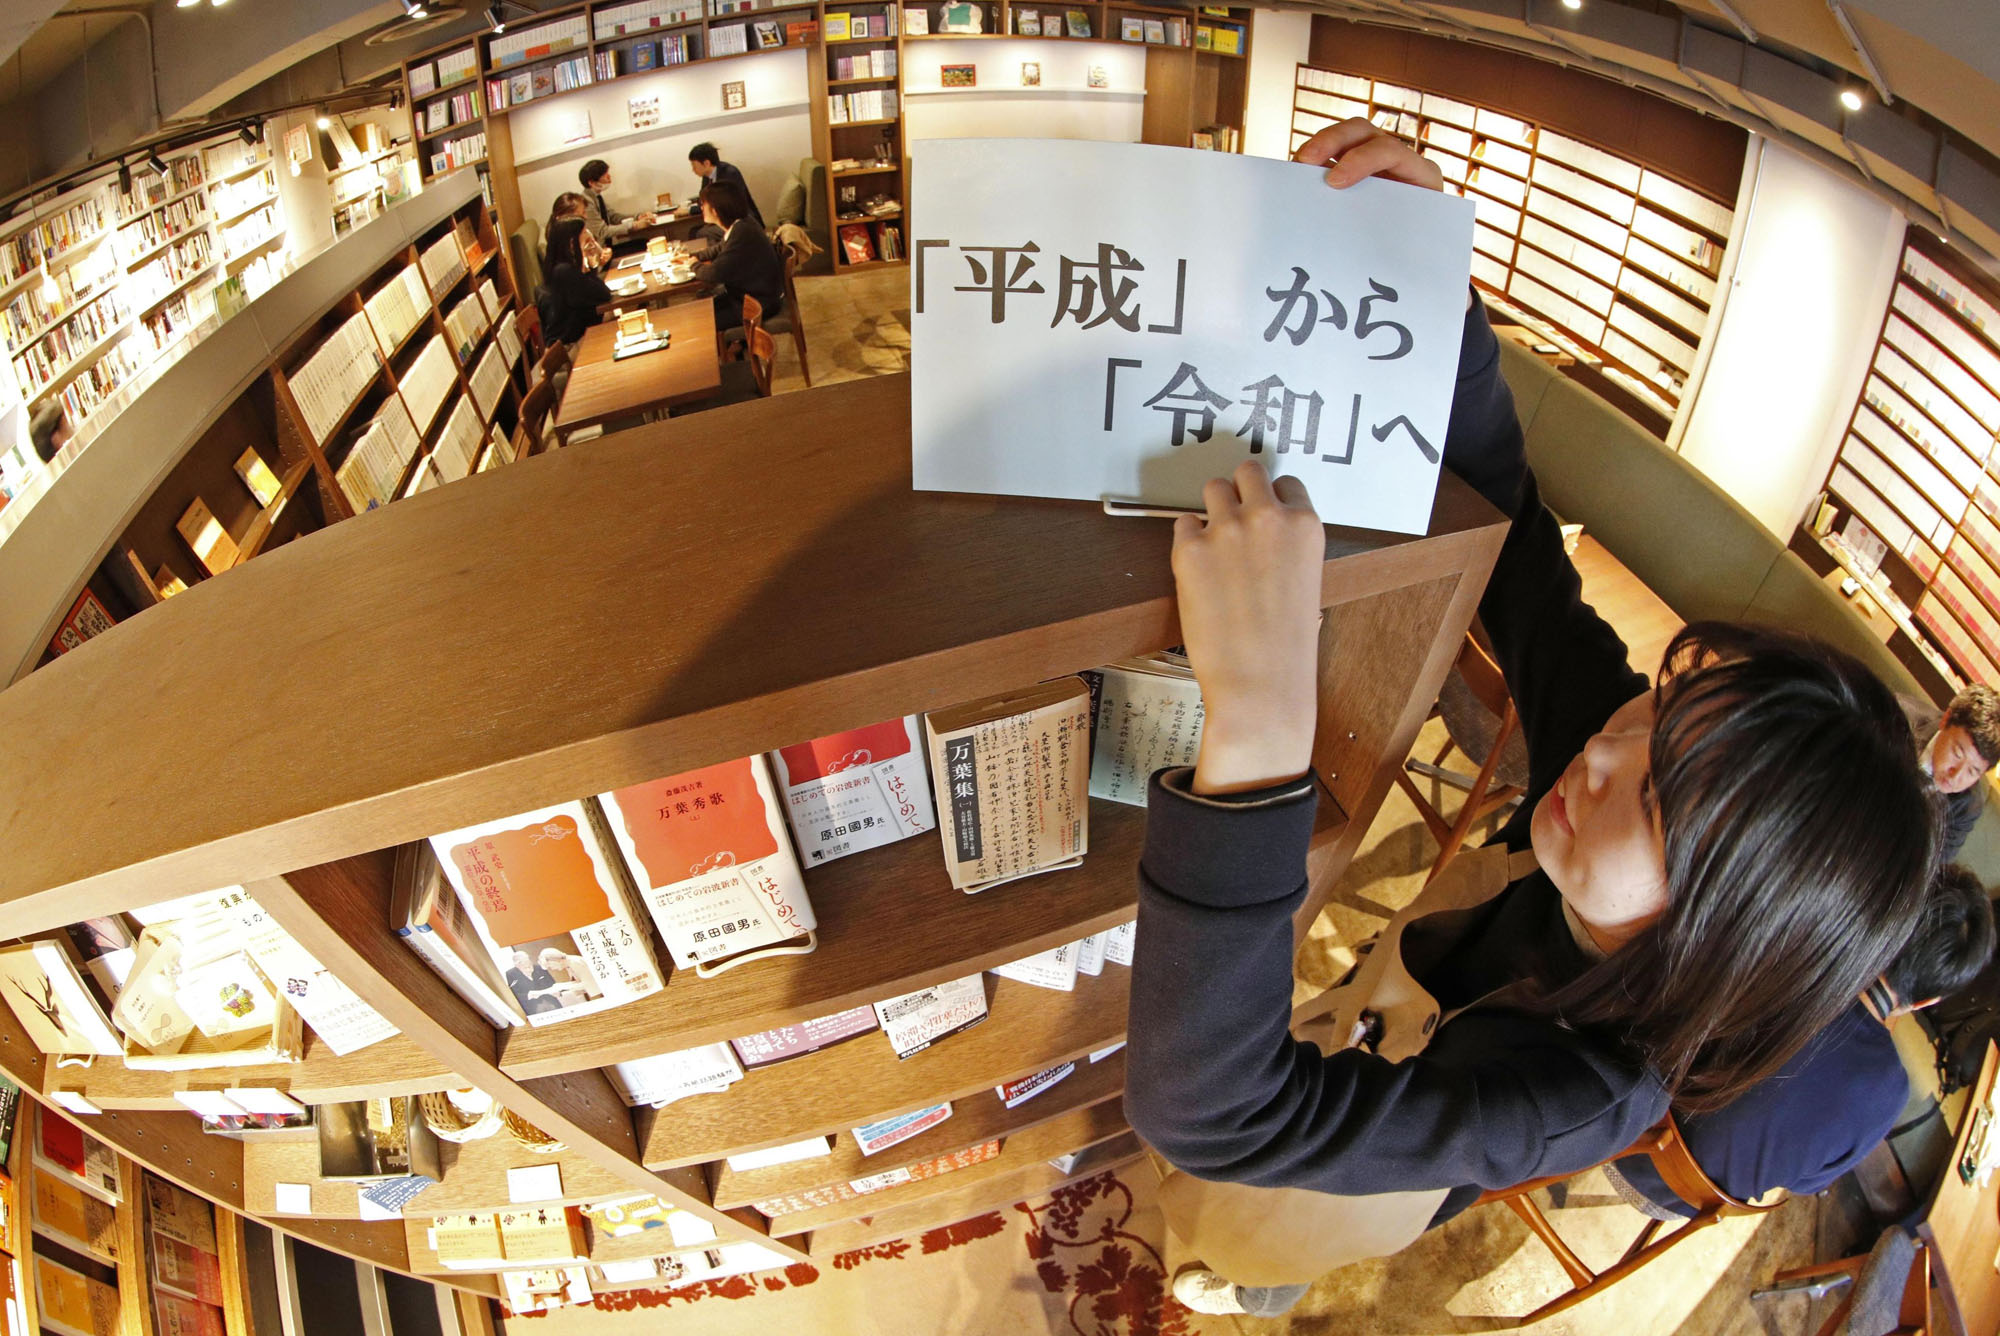 A special section dedicated to the upcoming transition from the Heisei Era to Reiwa is set up at a bookstore in Tokyo on Tuesday. The new era will begin May 1 when Crown Prince Naruhito ascends to the Chrysanthemum Throne after his father, Emperor Akihito, abdicates on April 30. | KYODO